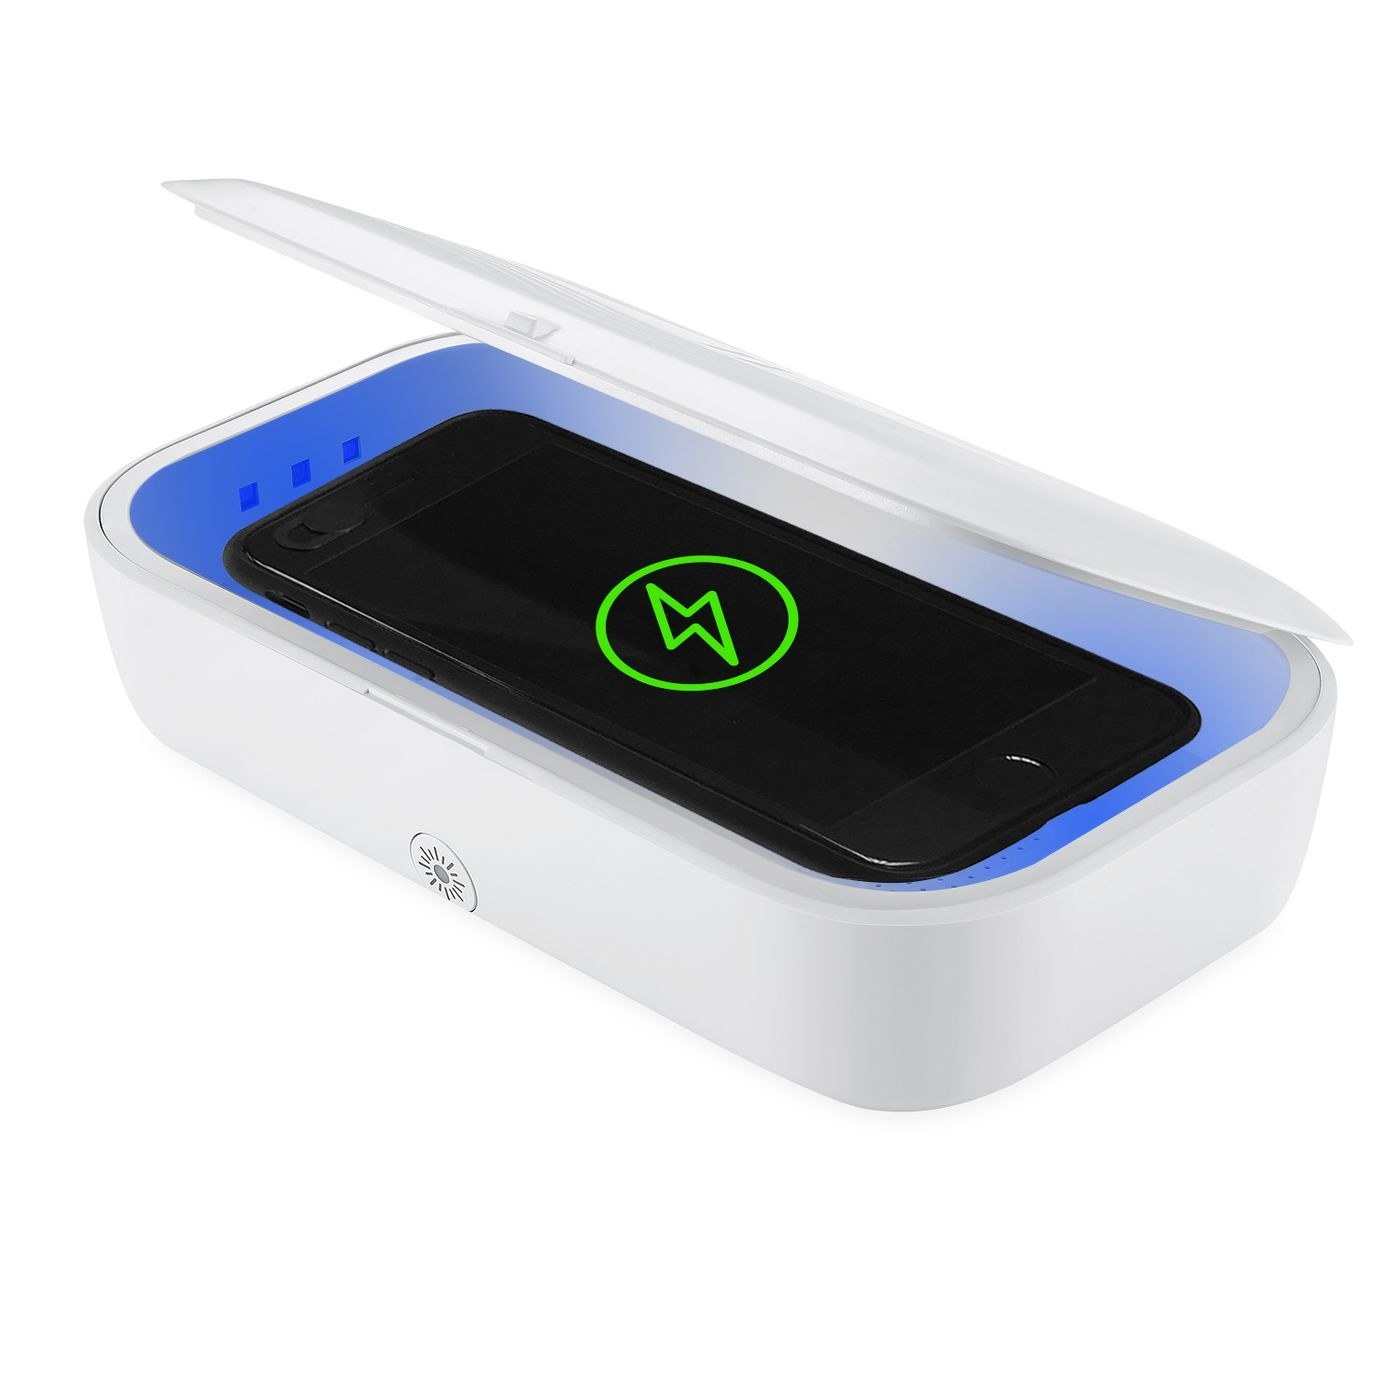 The UV sanitizer, which is rectangular, slightly larger than a phone, and has a top cover to close after you place your phone inside